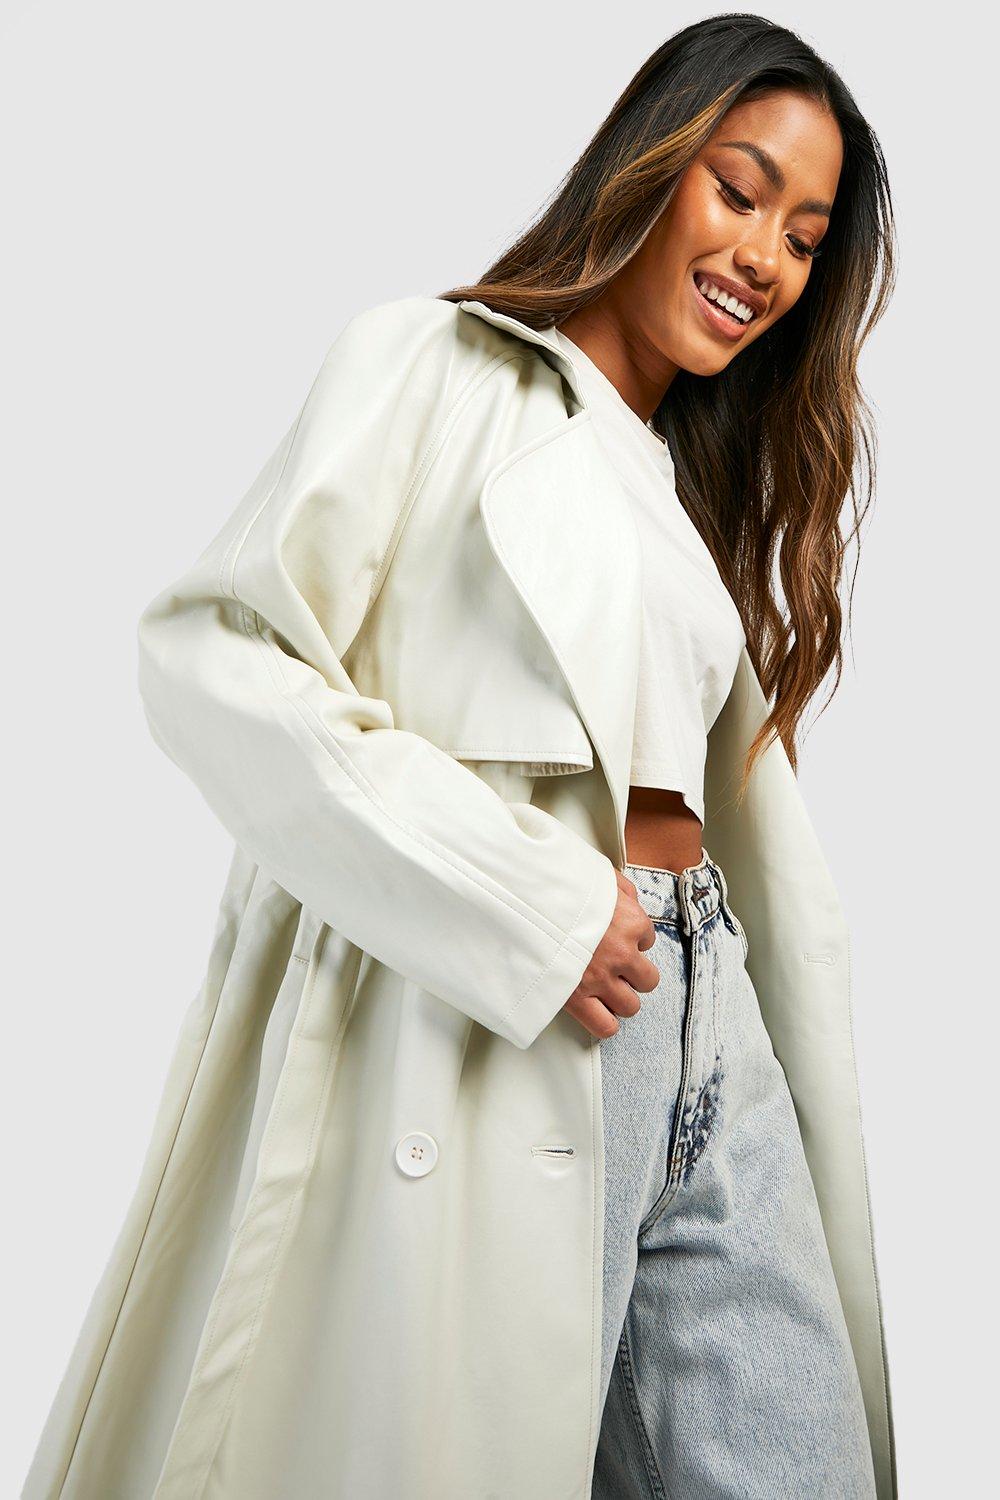 ZJHANHGKK thin jean jacket women for summer trench coats for women plus  size white leather jacket long coat for : Clothing, Shoes & Jewelry 